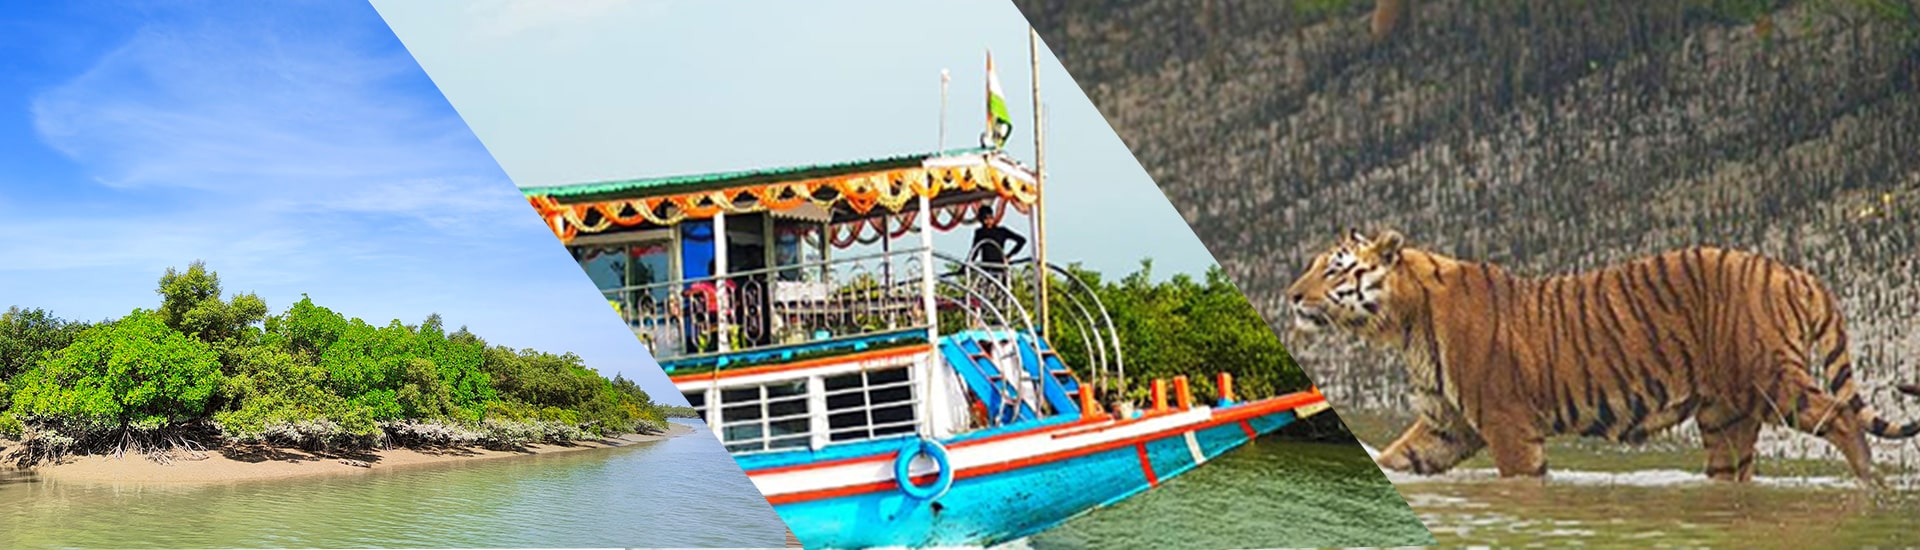 Importance of Sundarban in West Bengal